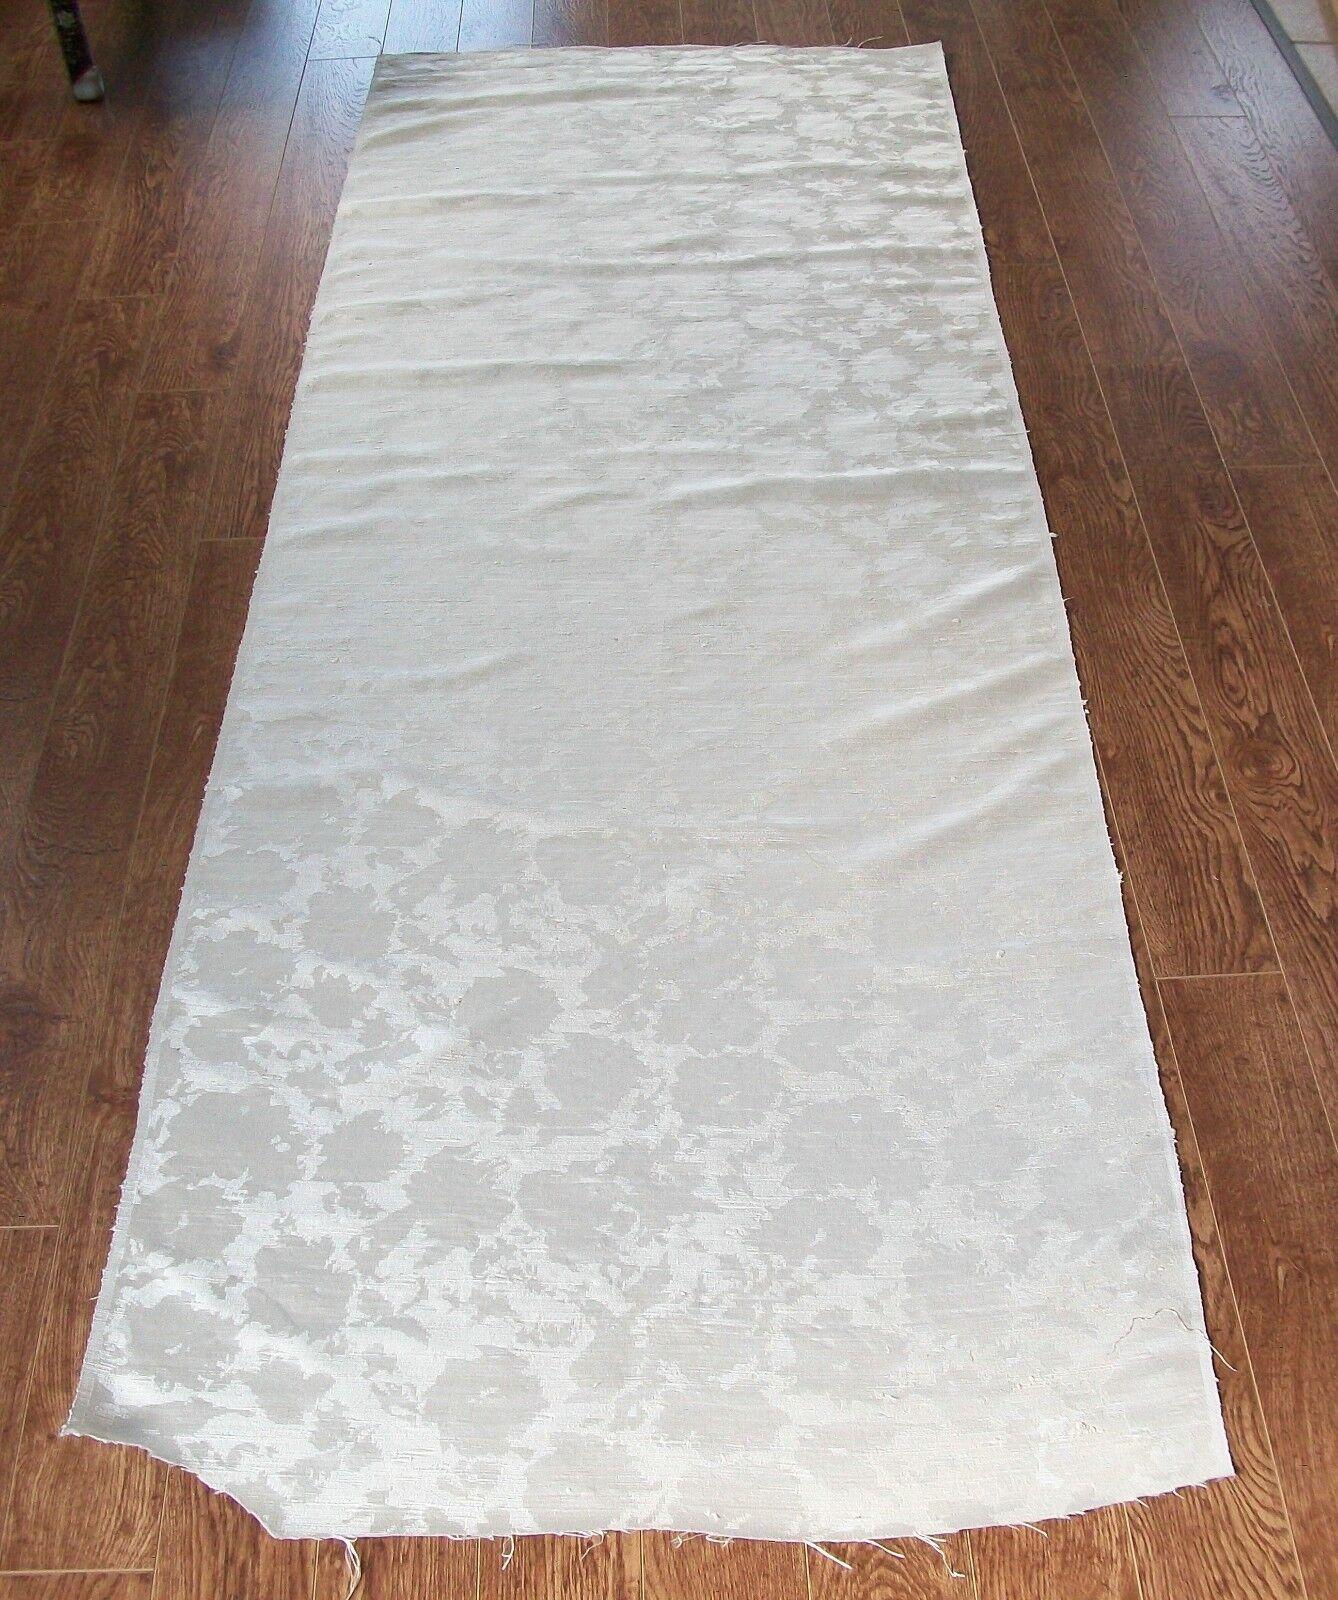 Hand-Woven Vintage Japanese Floral Silk Damask Fabric - Pearl Gray - 100% Silk - C.1950's For Sale